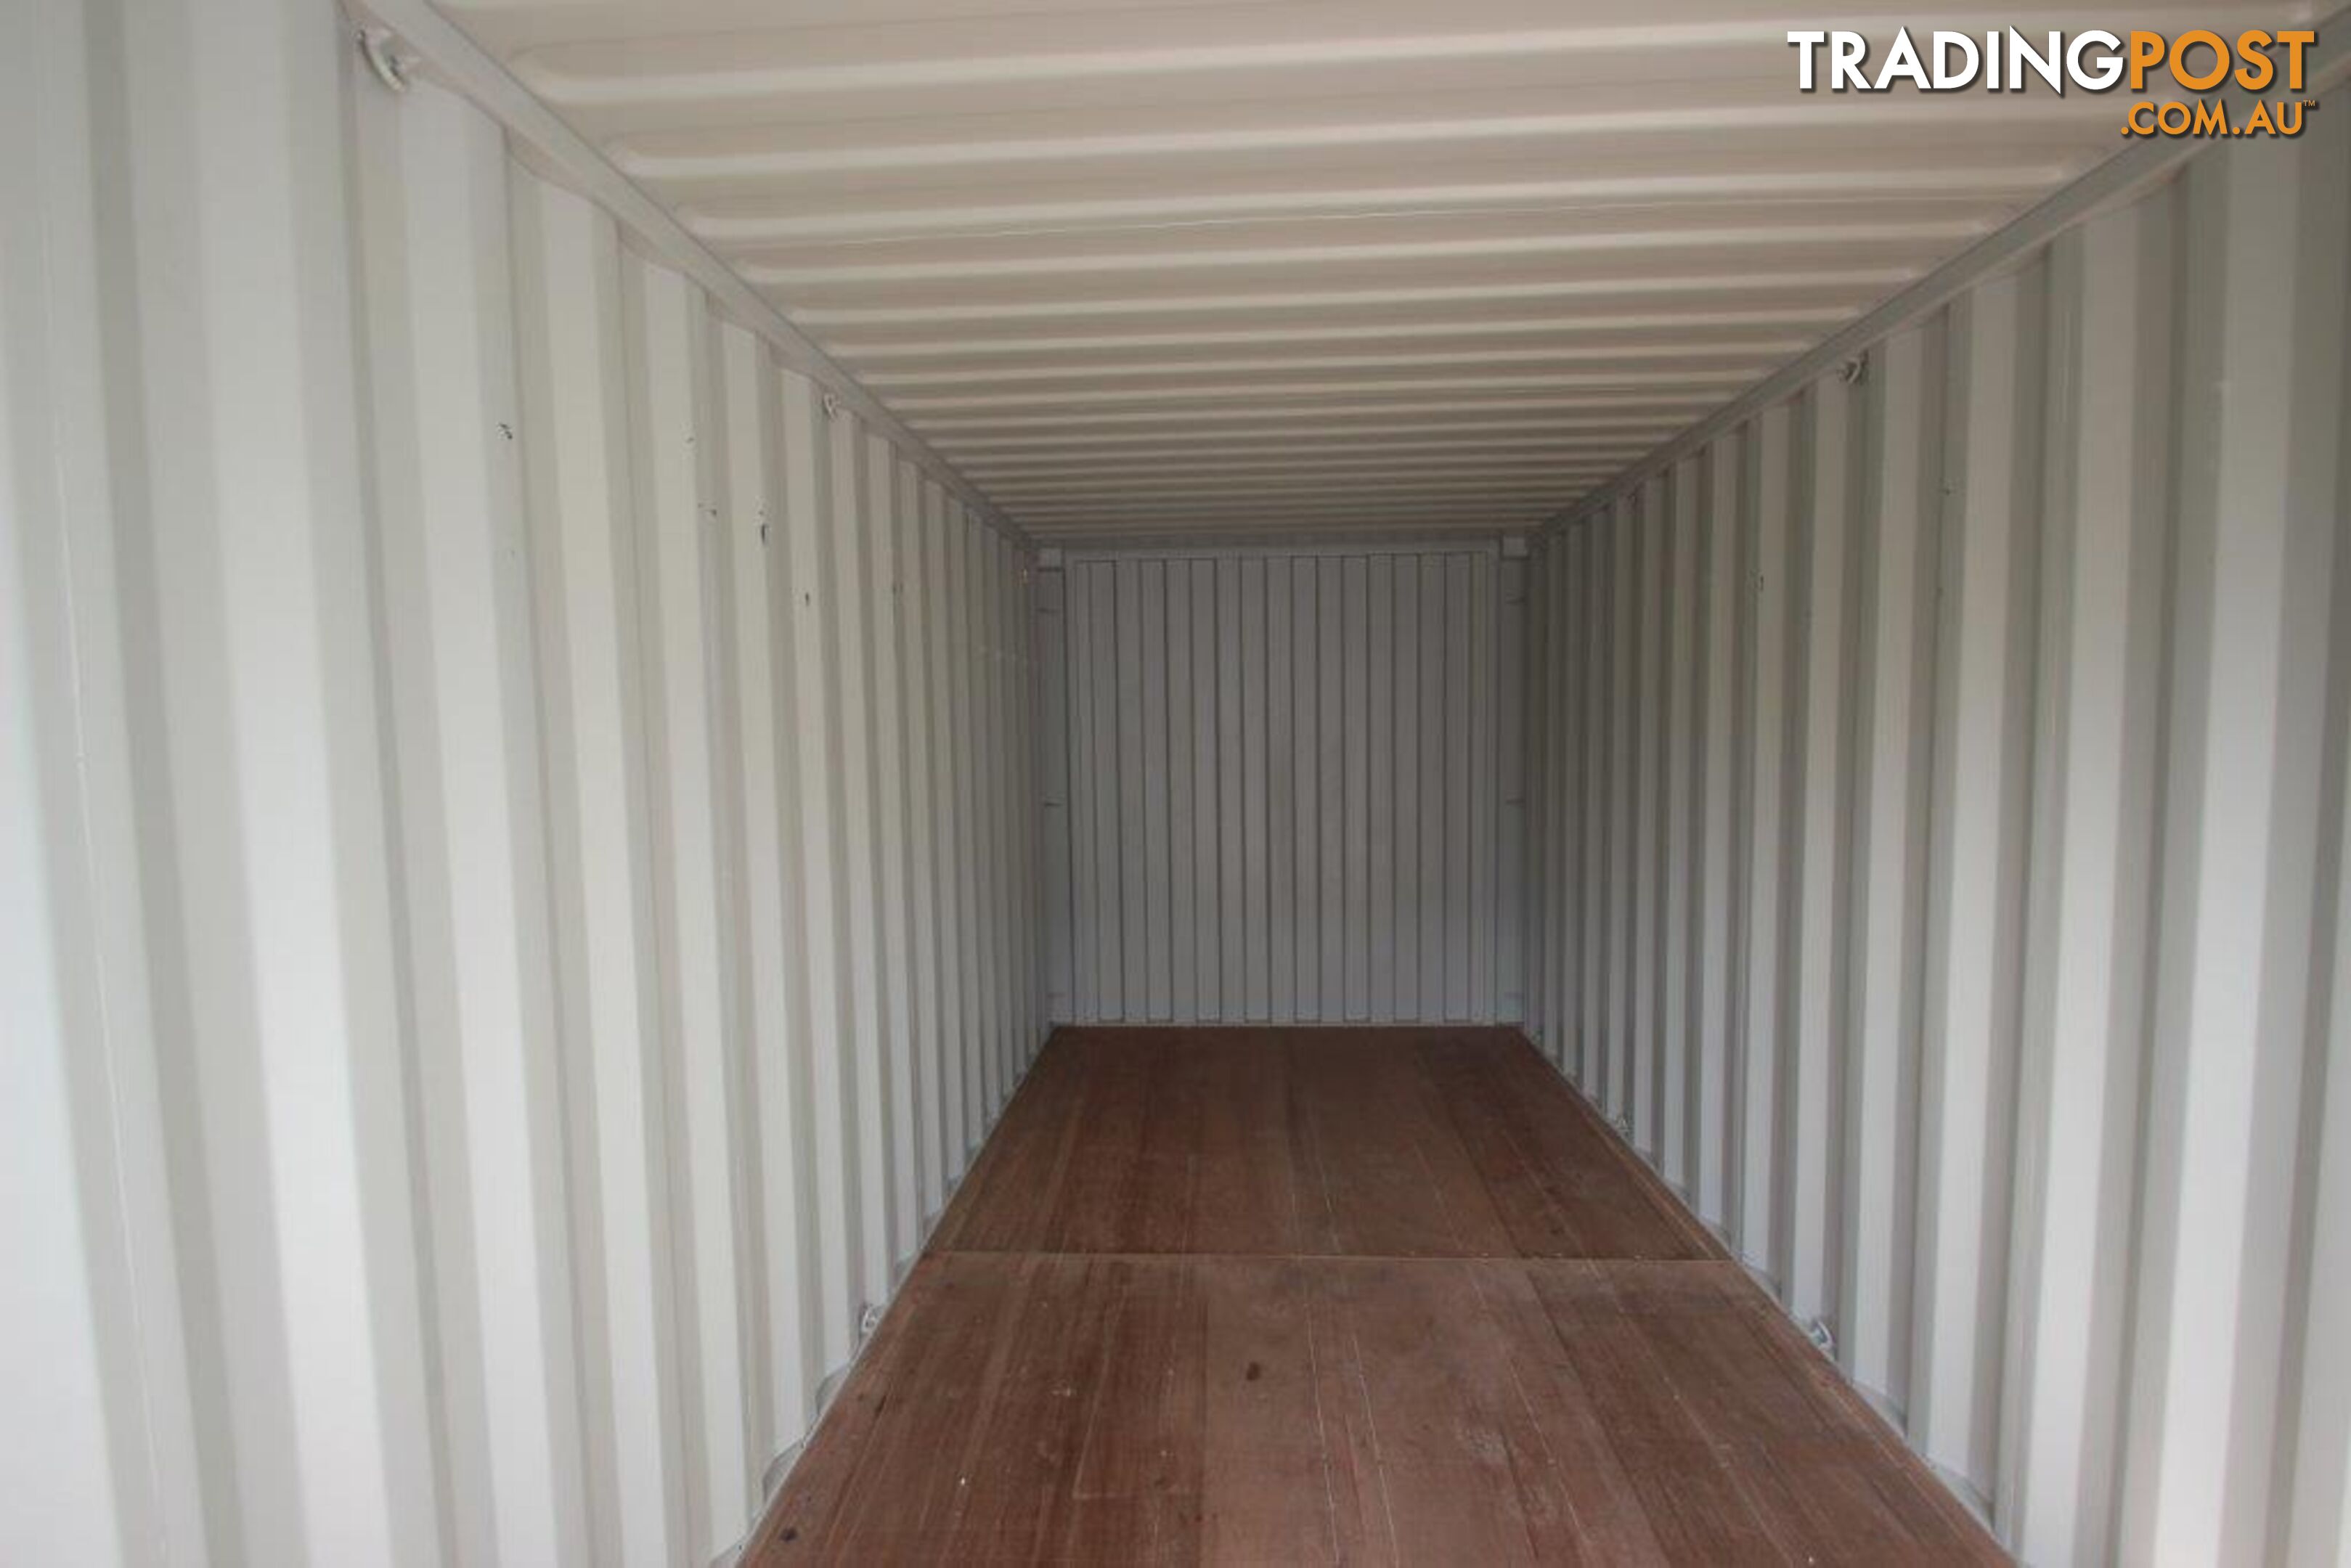 New 20ft Shipping Containers Clifton - From $6550 + GST